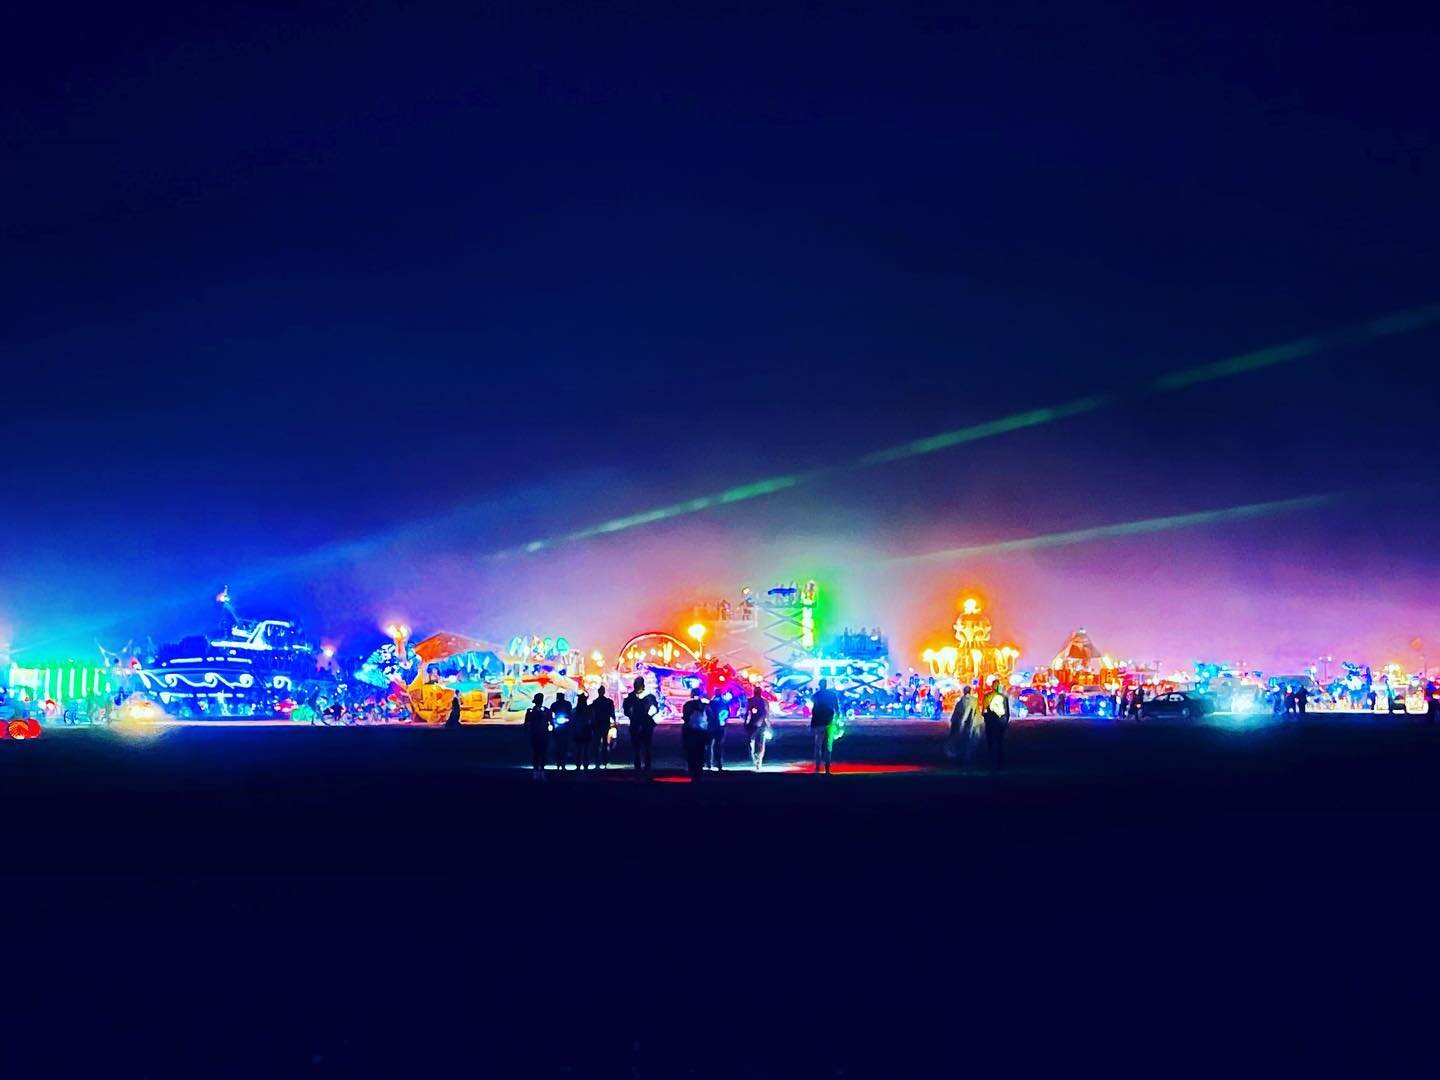 These lights are blinding my eyes. People pushing by, walking off into the night. ✨✨✨#burningman #neonlights #anotheronebitesthedust